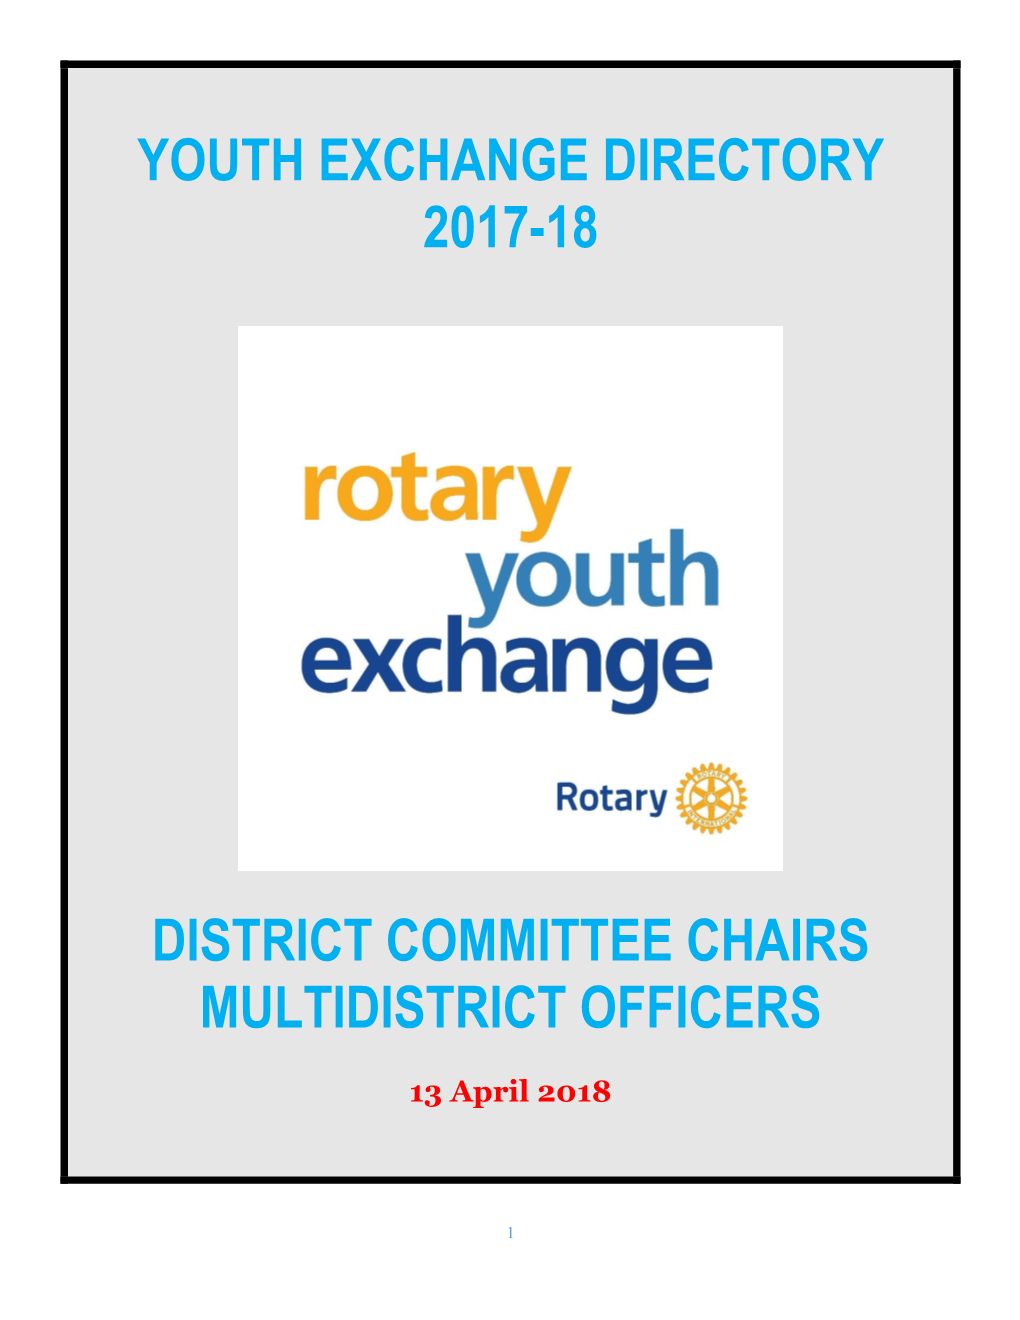 Youth Exchange Directory 2017-18 District Committee Chairs Multidistrict